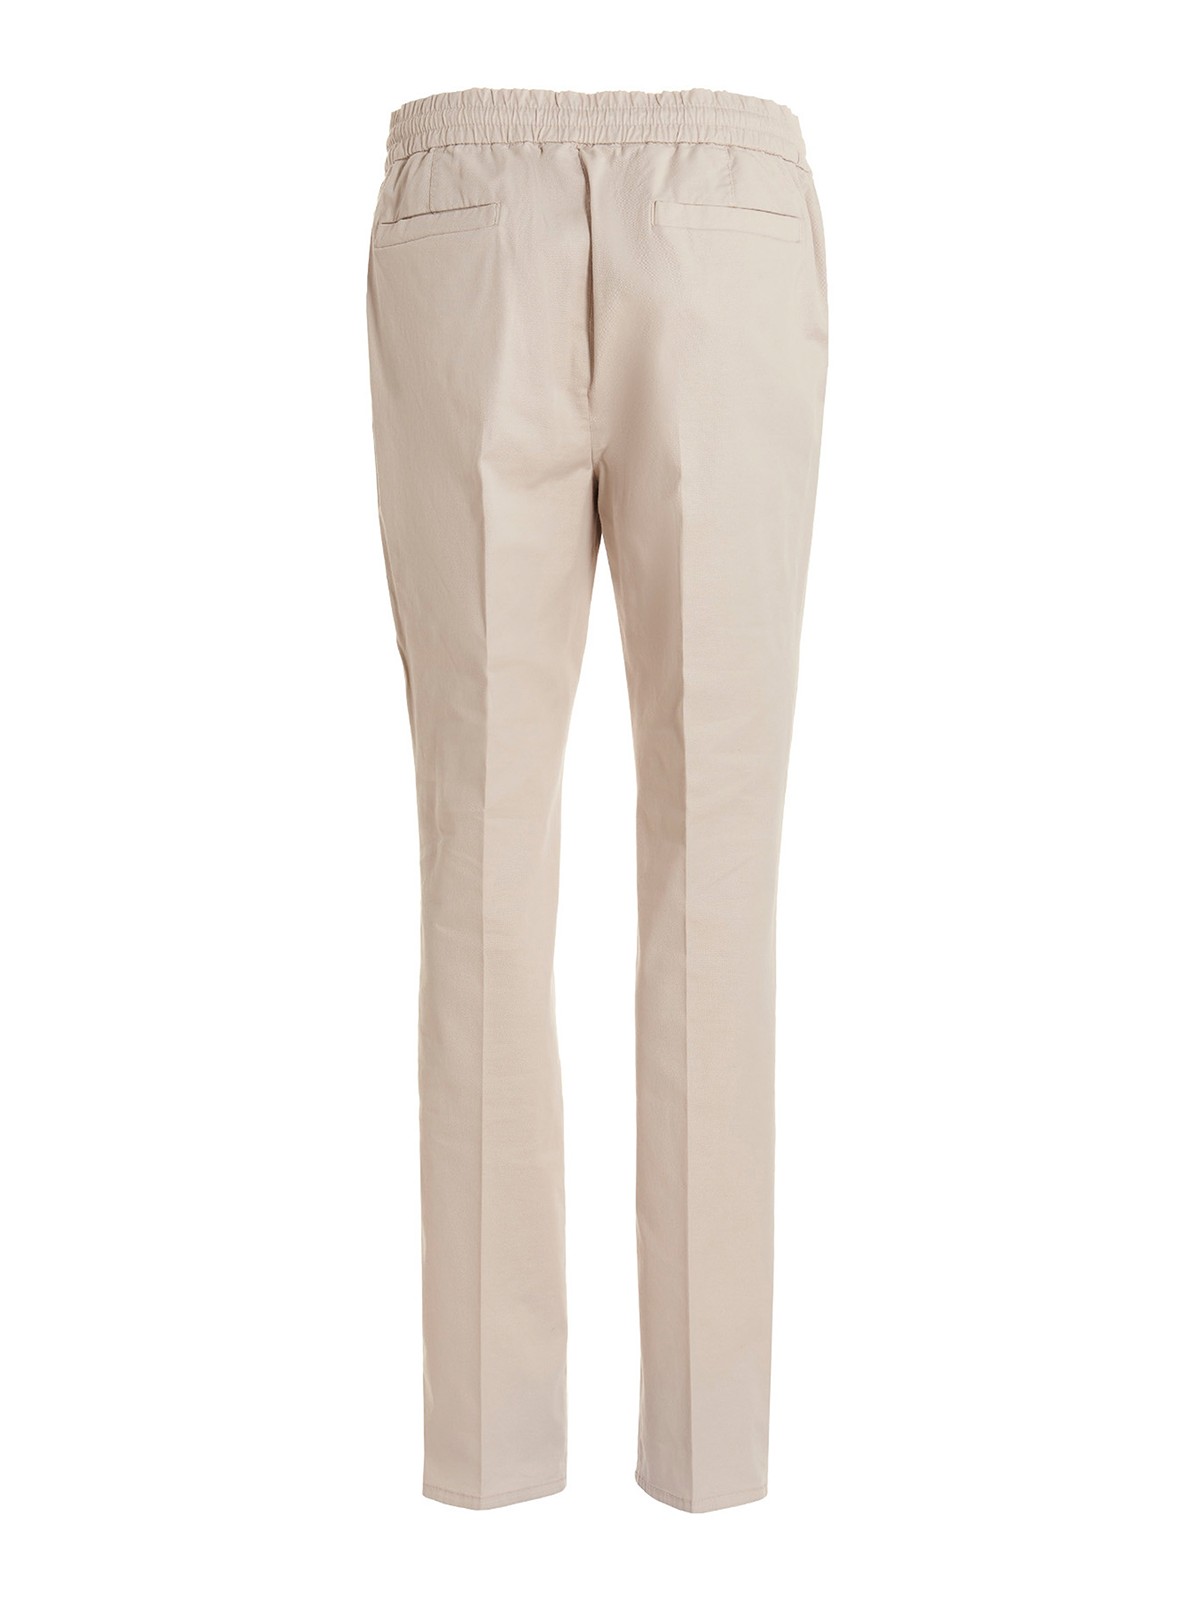 pt05-online-casual-trousers-stretch-cotton-trousers-00000196671f00s002.jpg